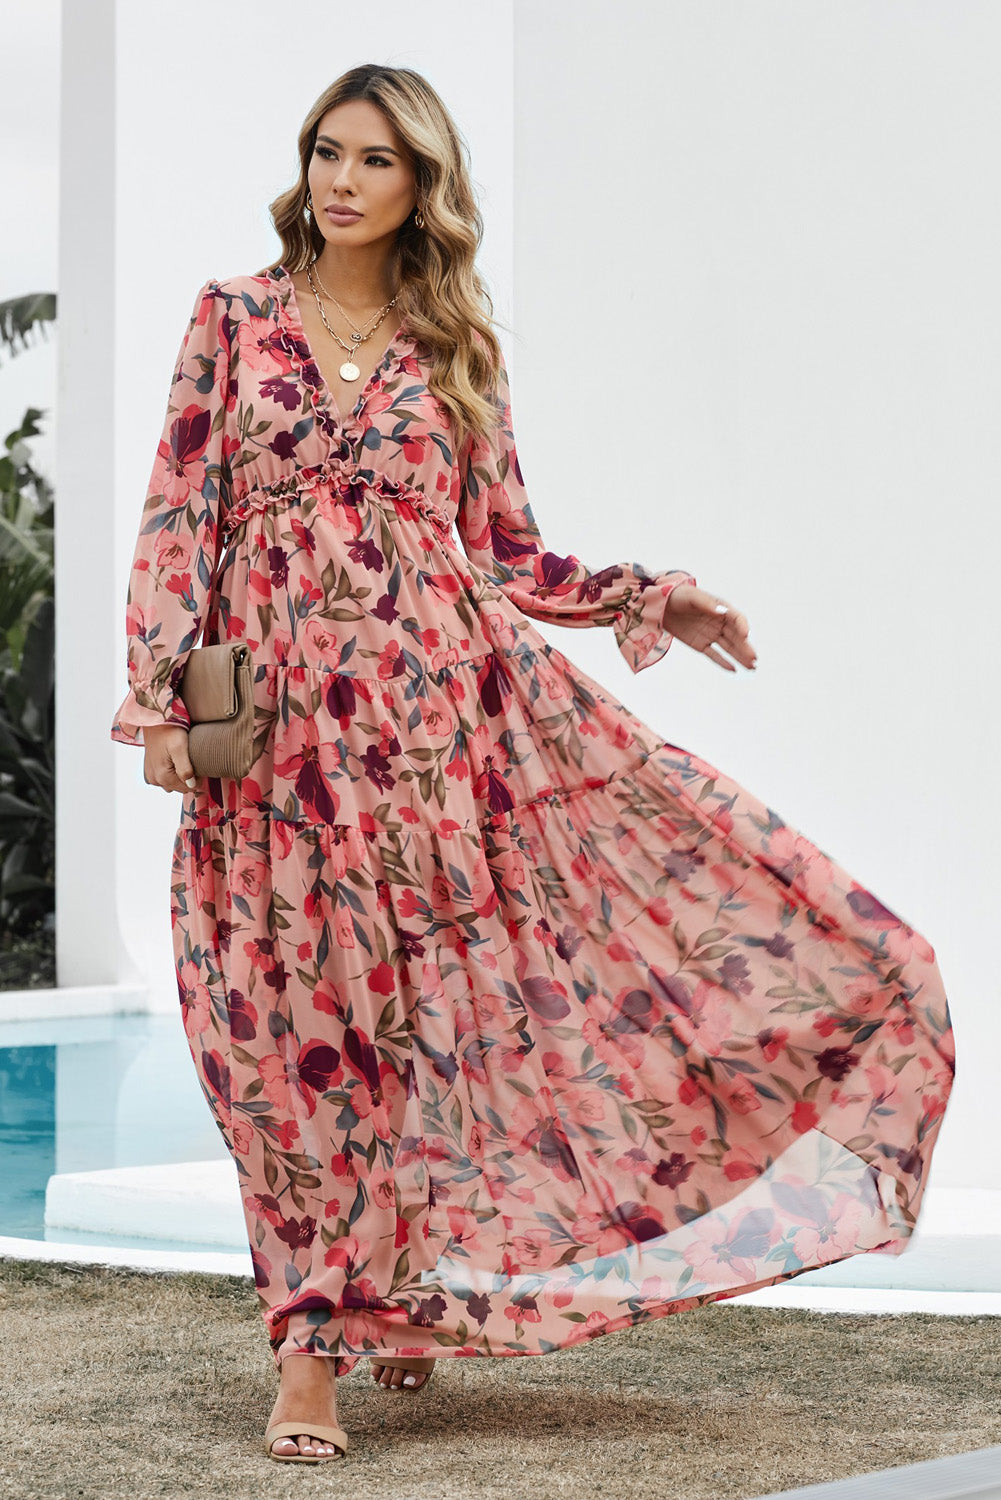 Sleeve Plunge Maxi: A maxi dress featuring a plunging neckline and sleeves, offering an alluring and elegant look.